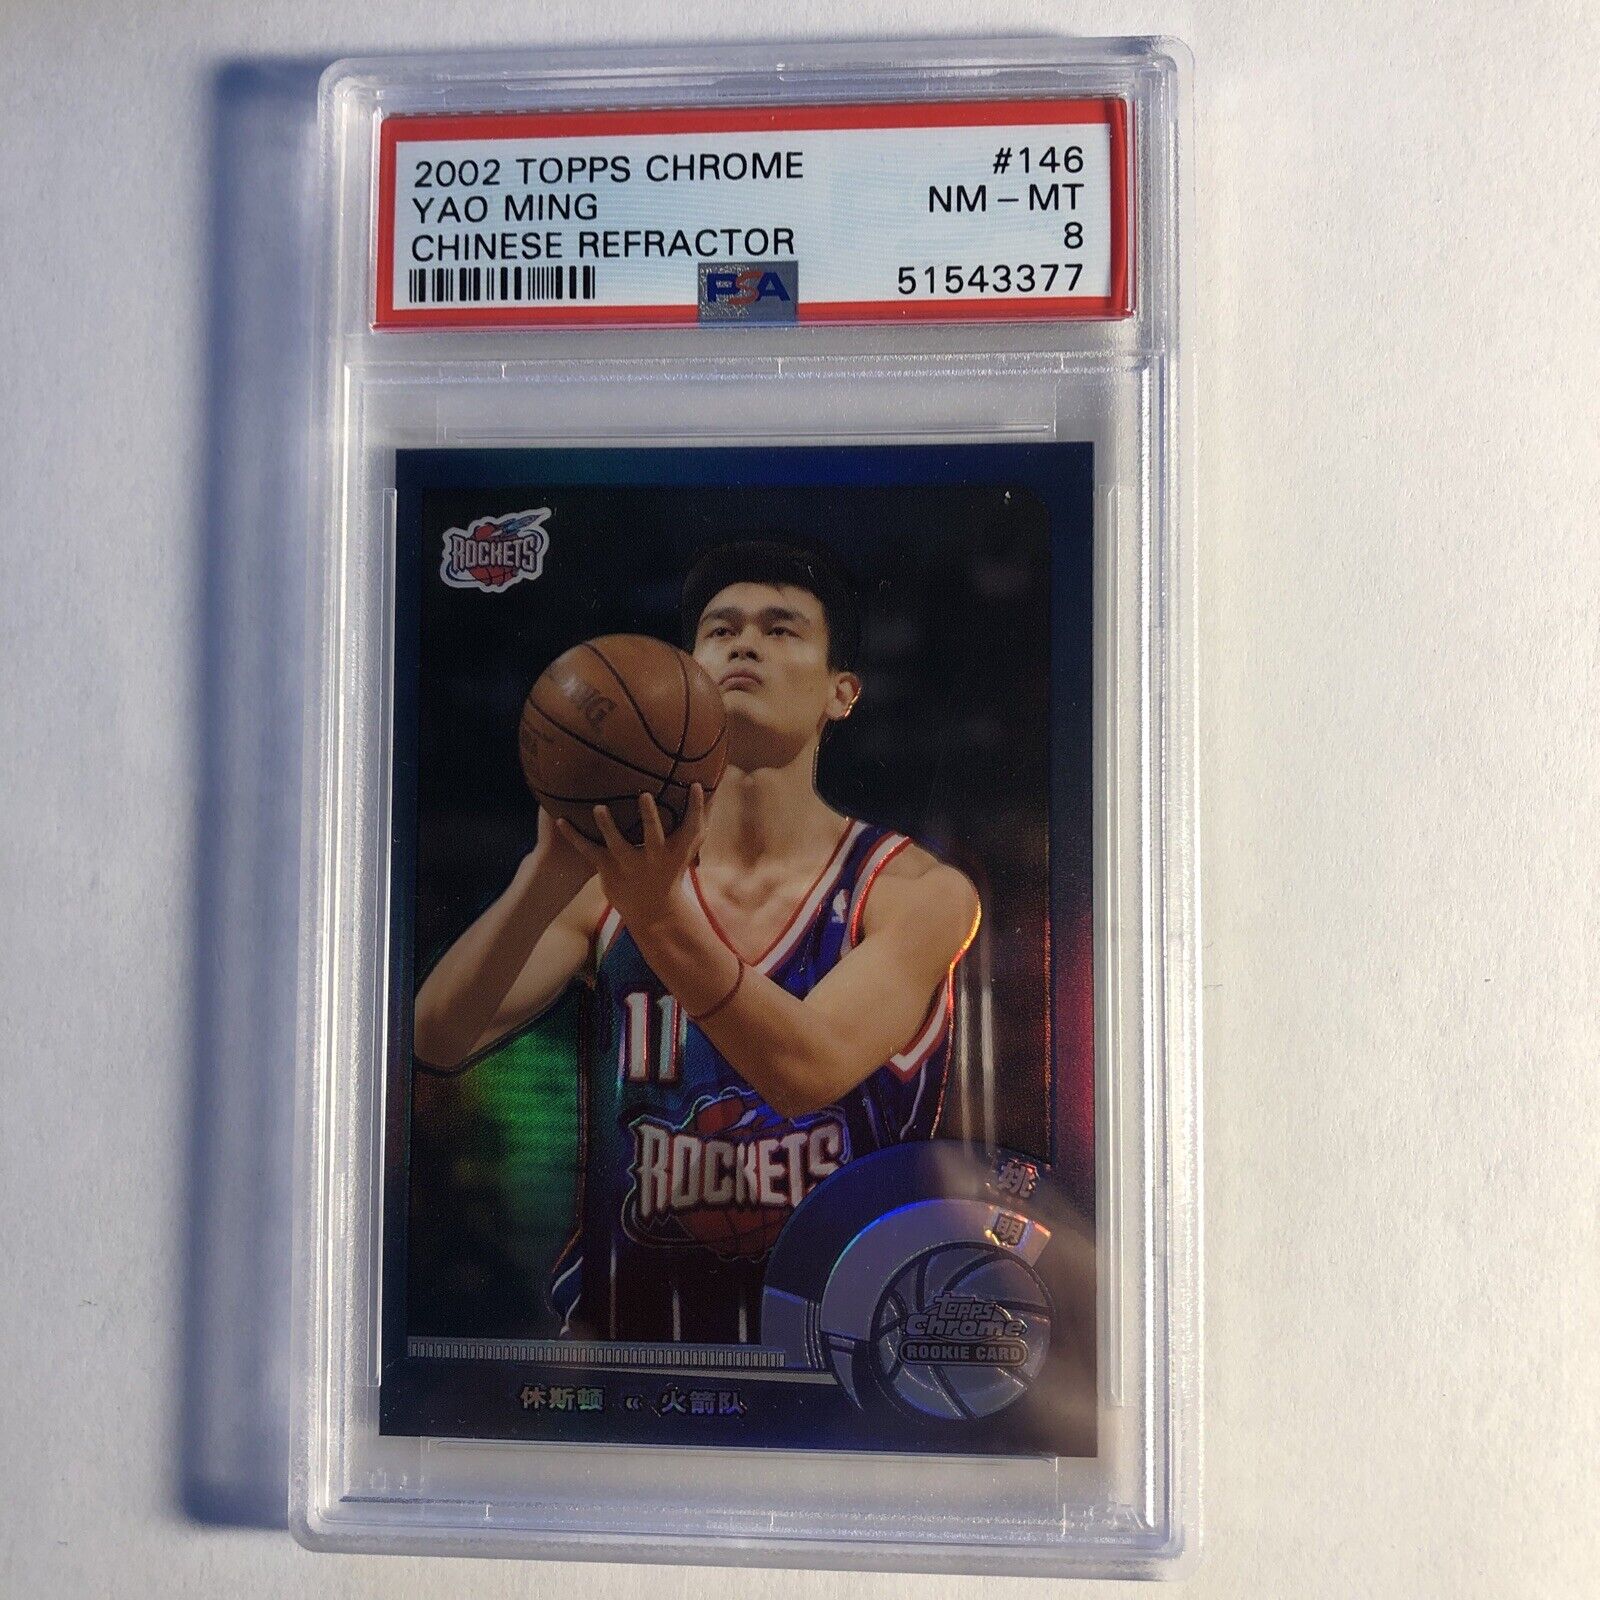 2002 Topps Chrome Refractor YAO MING CHINESE Rookie Card RC #146 PSA 8 